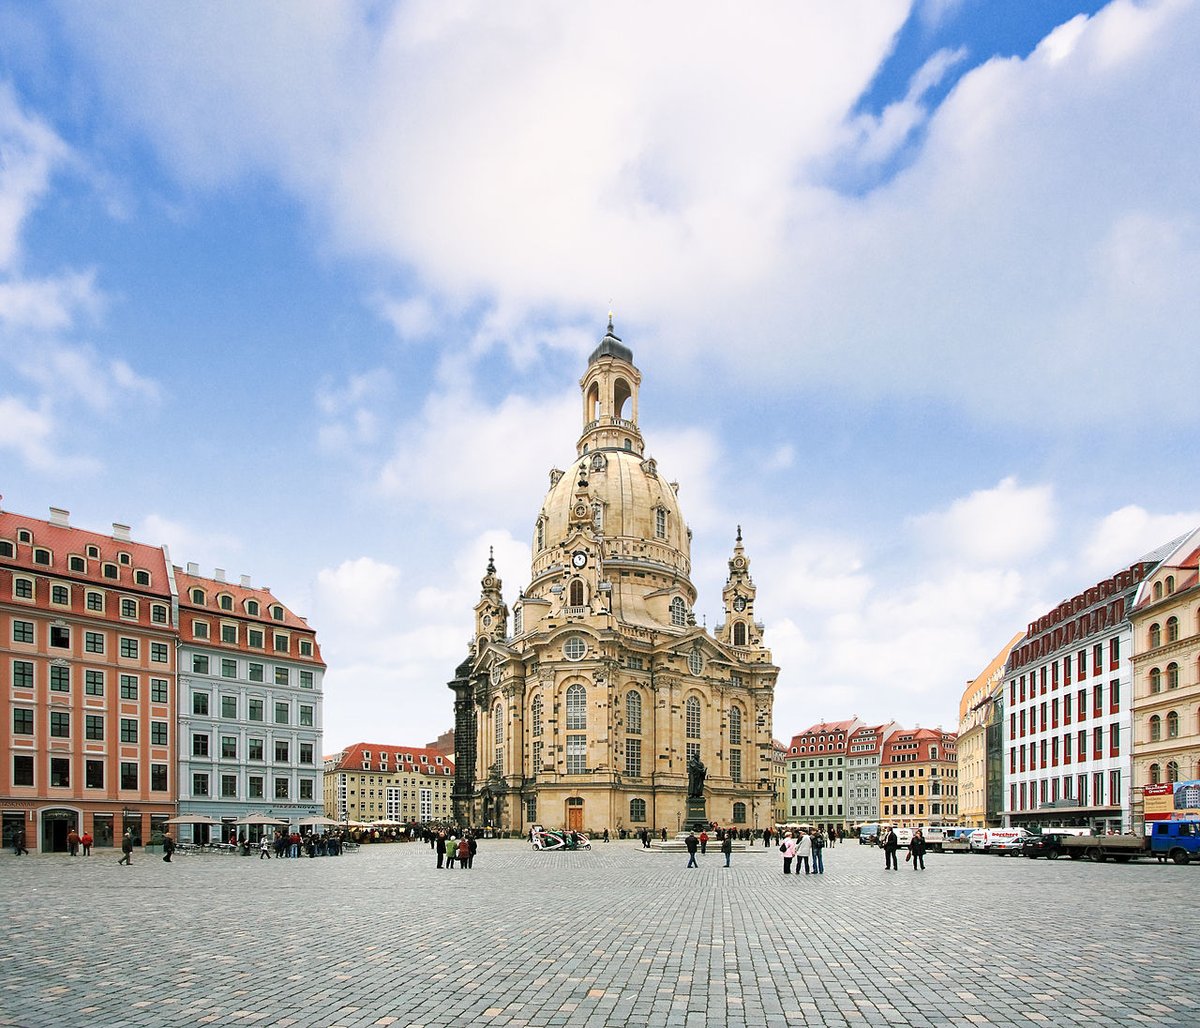 With its capital in Dresden, the state had an area of 14,993 km sq and a population of 2,556,000 in 1871. This Lutheran state was ruled by a Catholic monarchy. This was because until 1763, the Electors were also Kings of Poland and Lithuania.